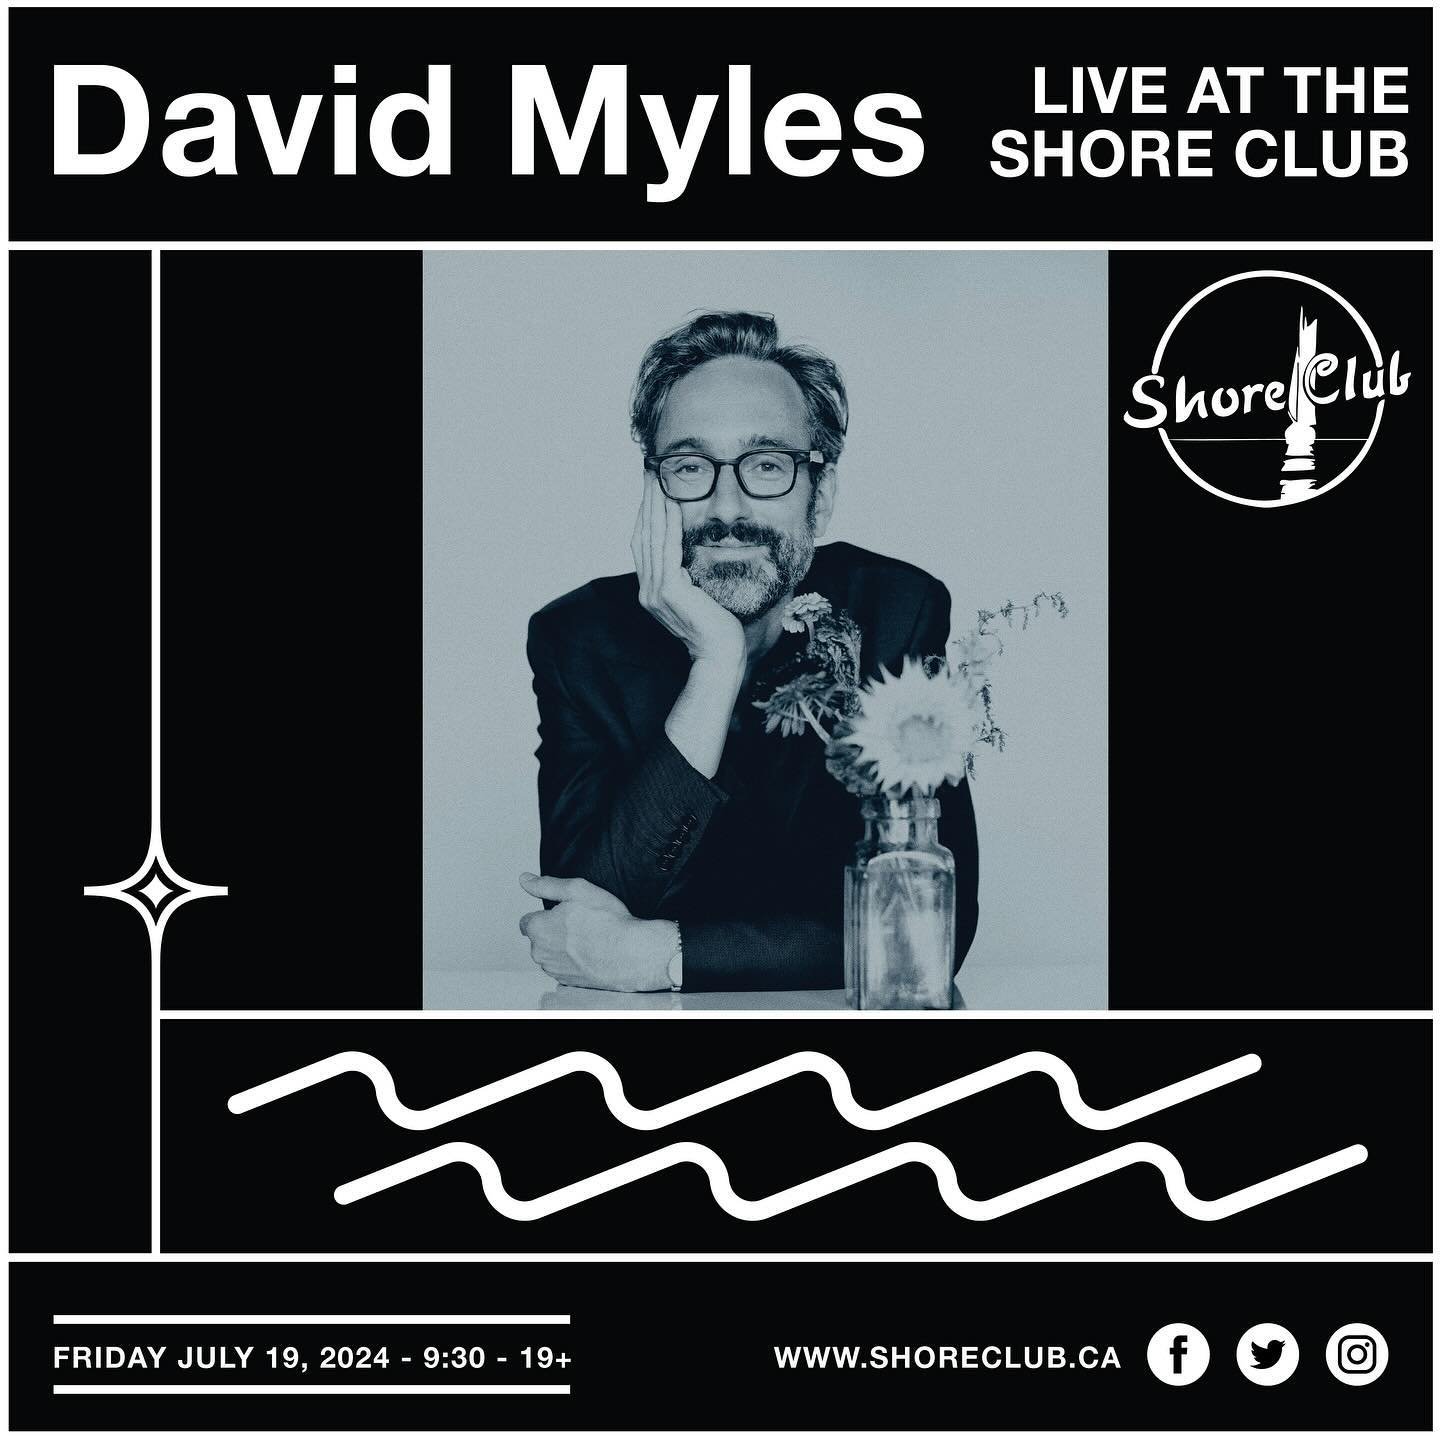 Come see David Myles inaugural performance at the Shore Club! The sonic shapeshifter has established himself as a world class entertainer with 15 albums &amp; 2 Junos. Come and rock, jazz, blues and funk out!
.
July 19,2024, 9:30, 19+
🎫 on sale May 